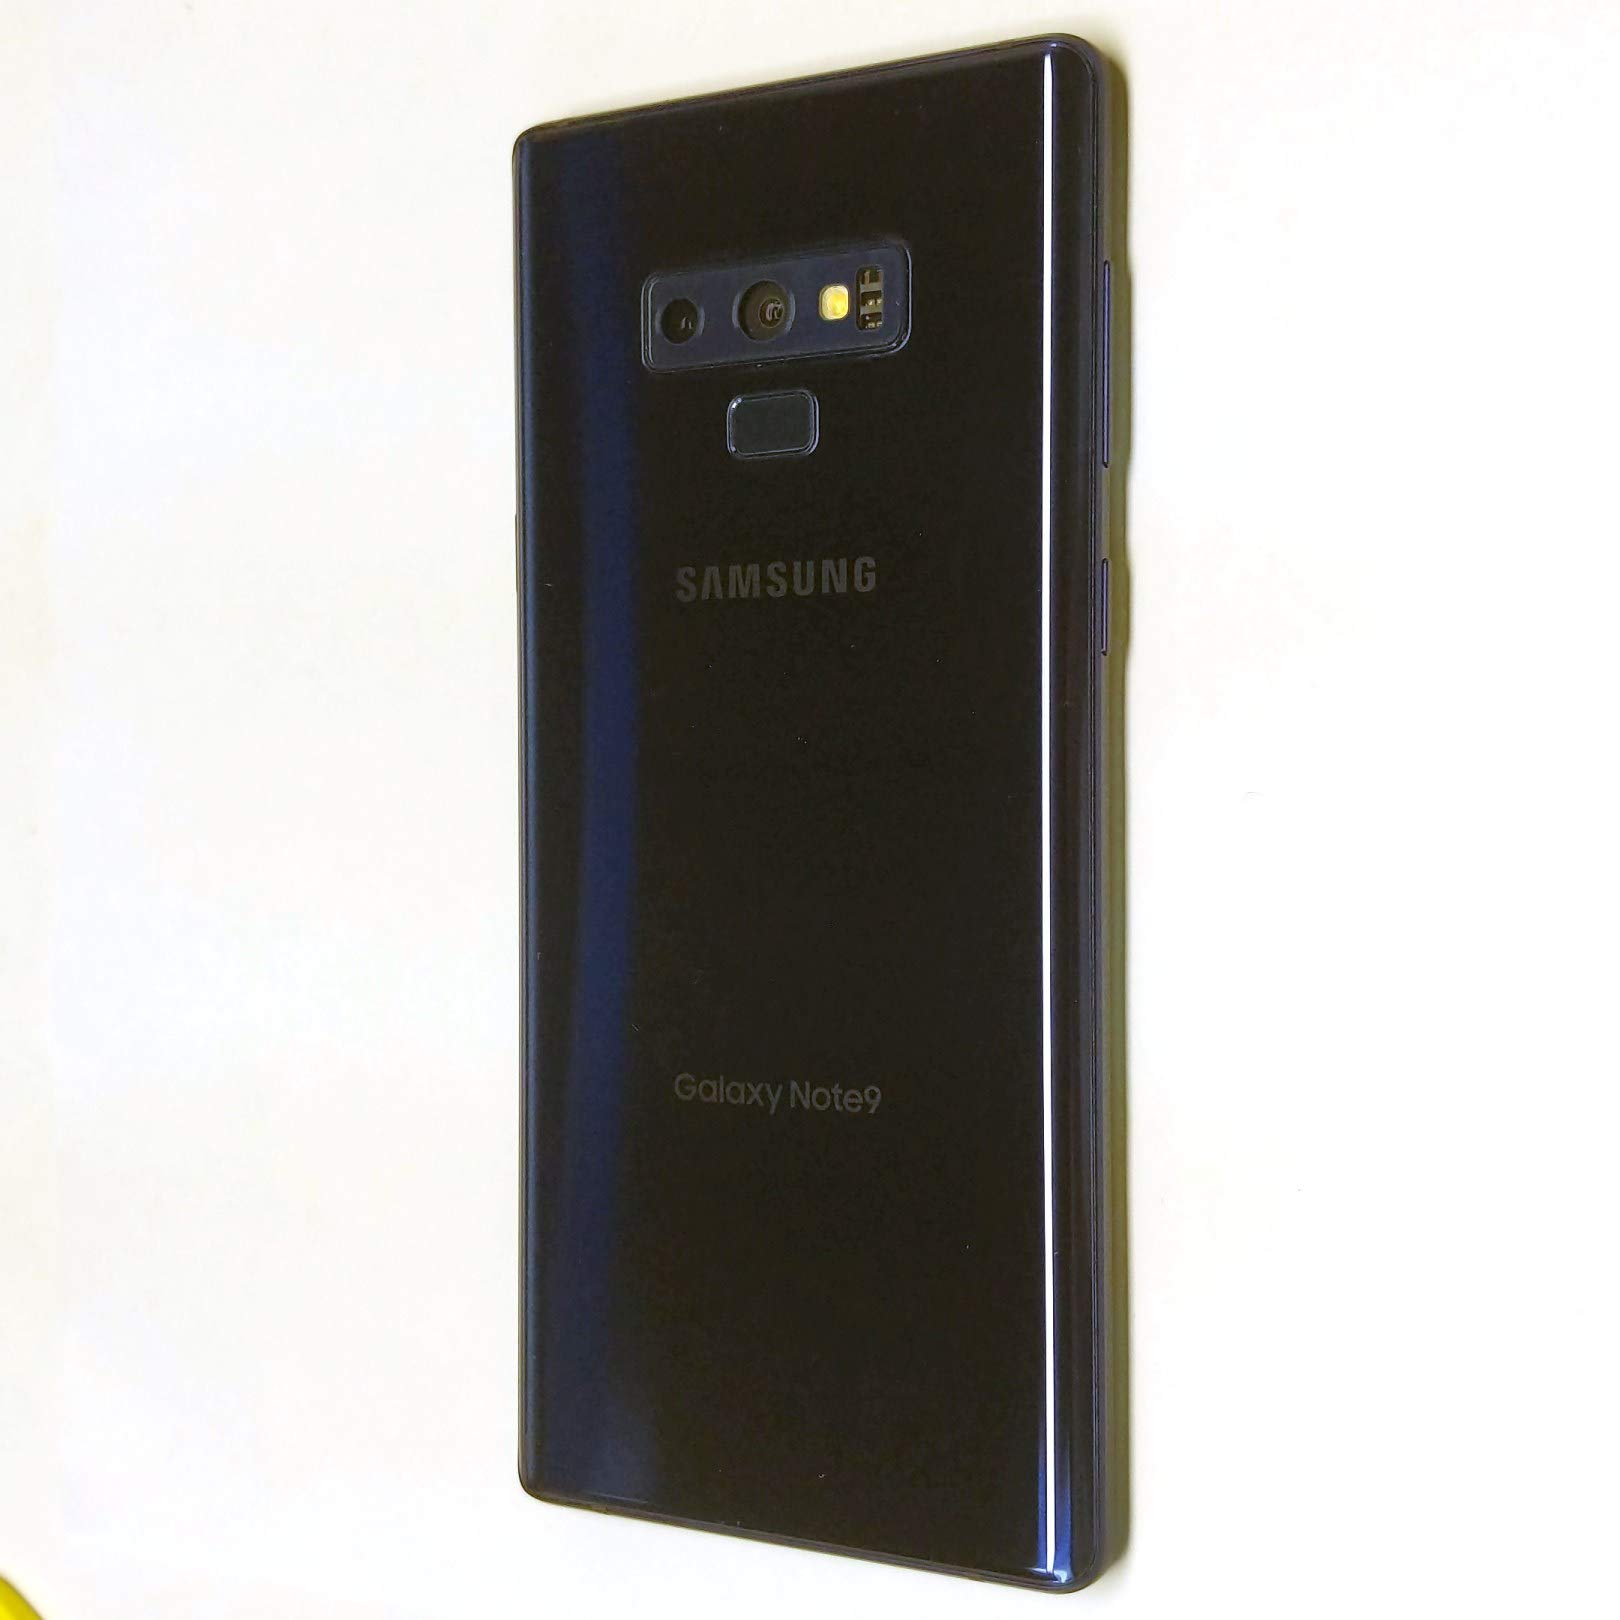 Samsung Galaxy Note 9 Factory Unlocked Phone with 6.4